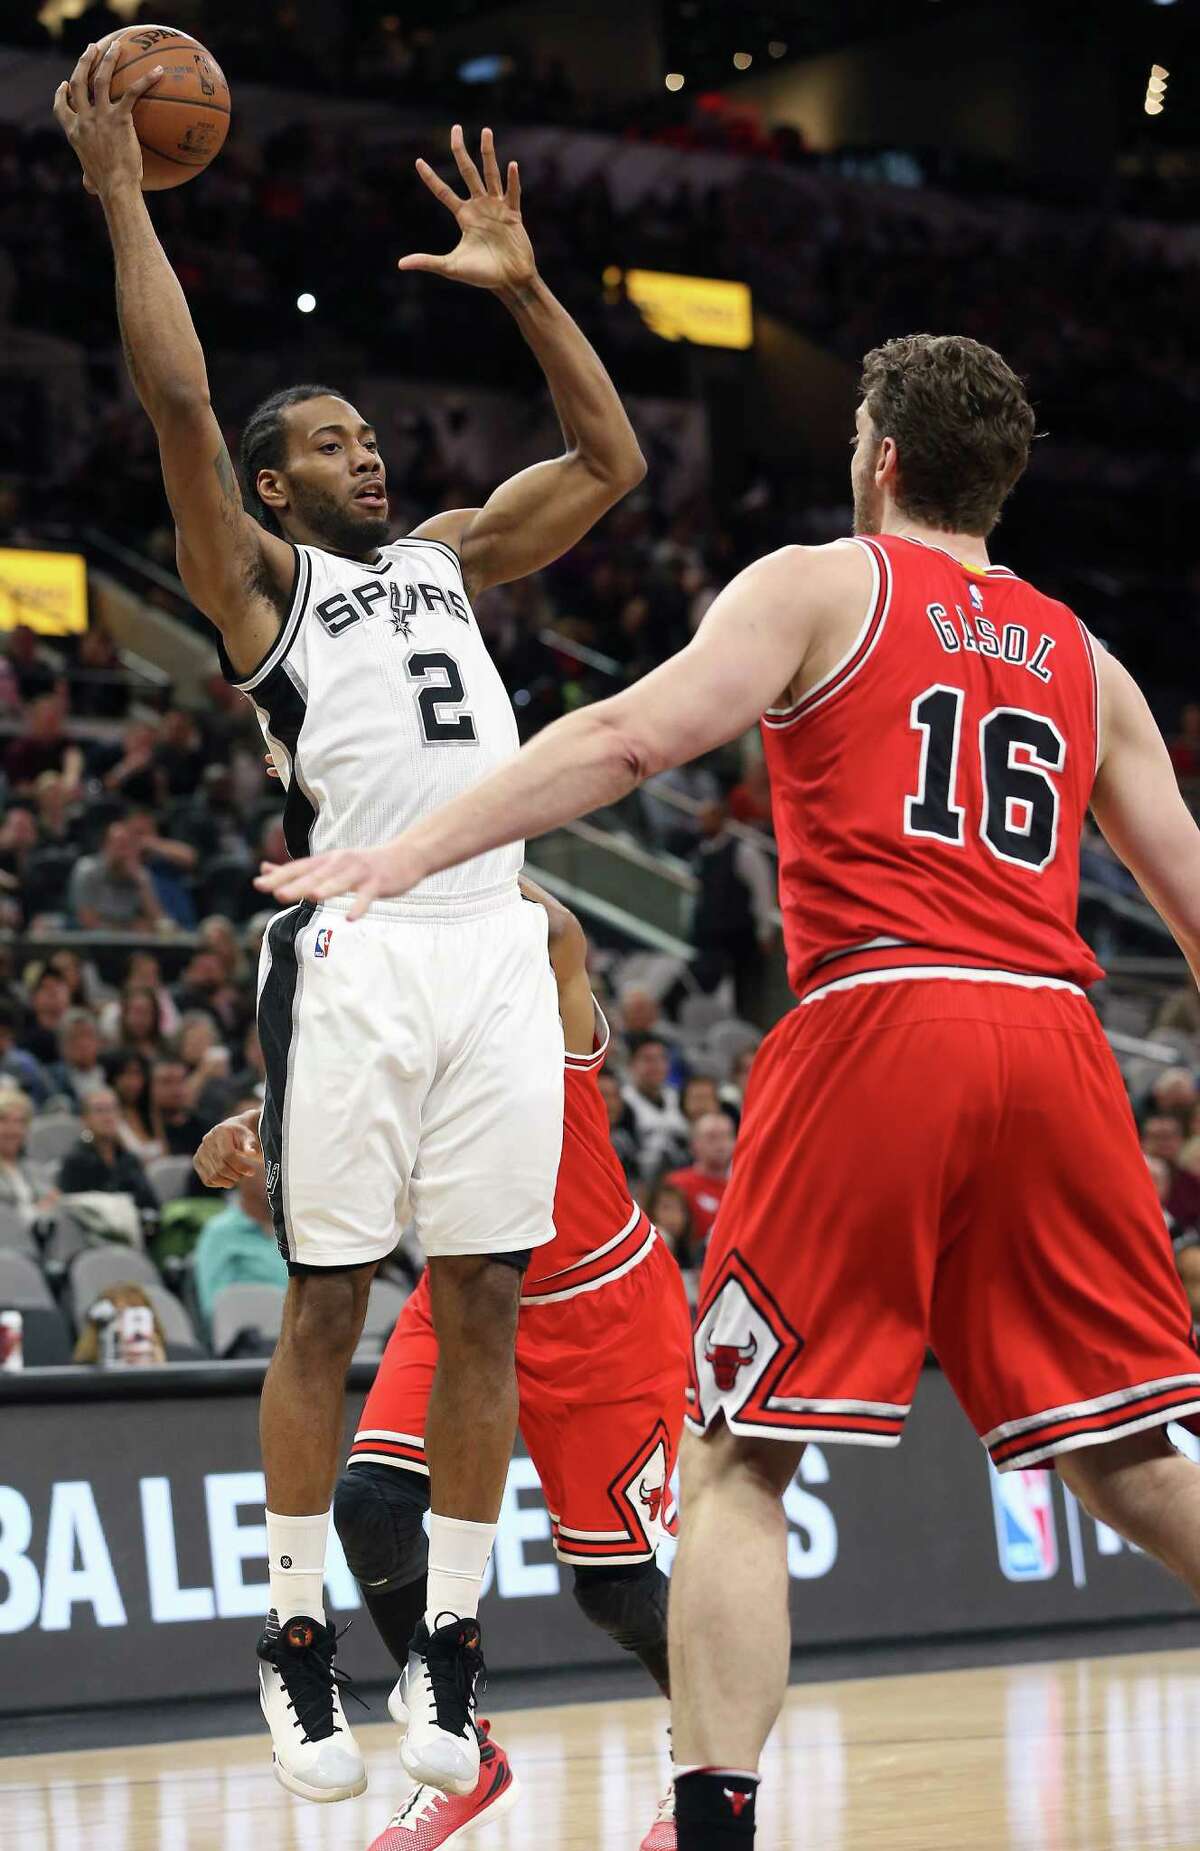 Kawhi Leonard goes up looking to pass as the Spurs host Chicago at the AT&T Center on March 10, 2016.